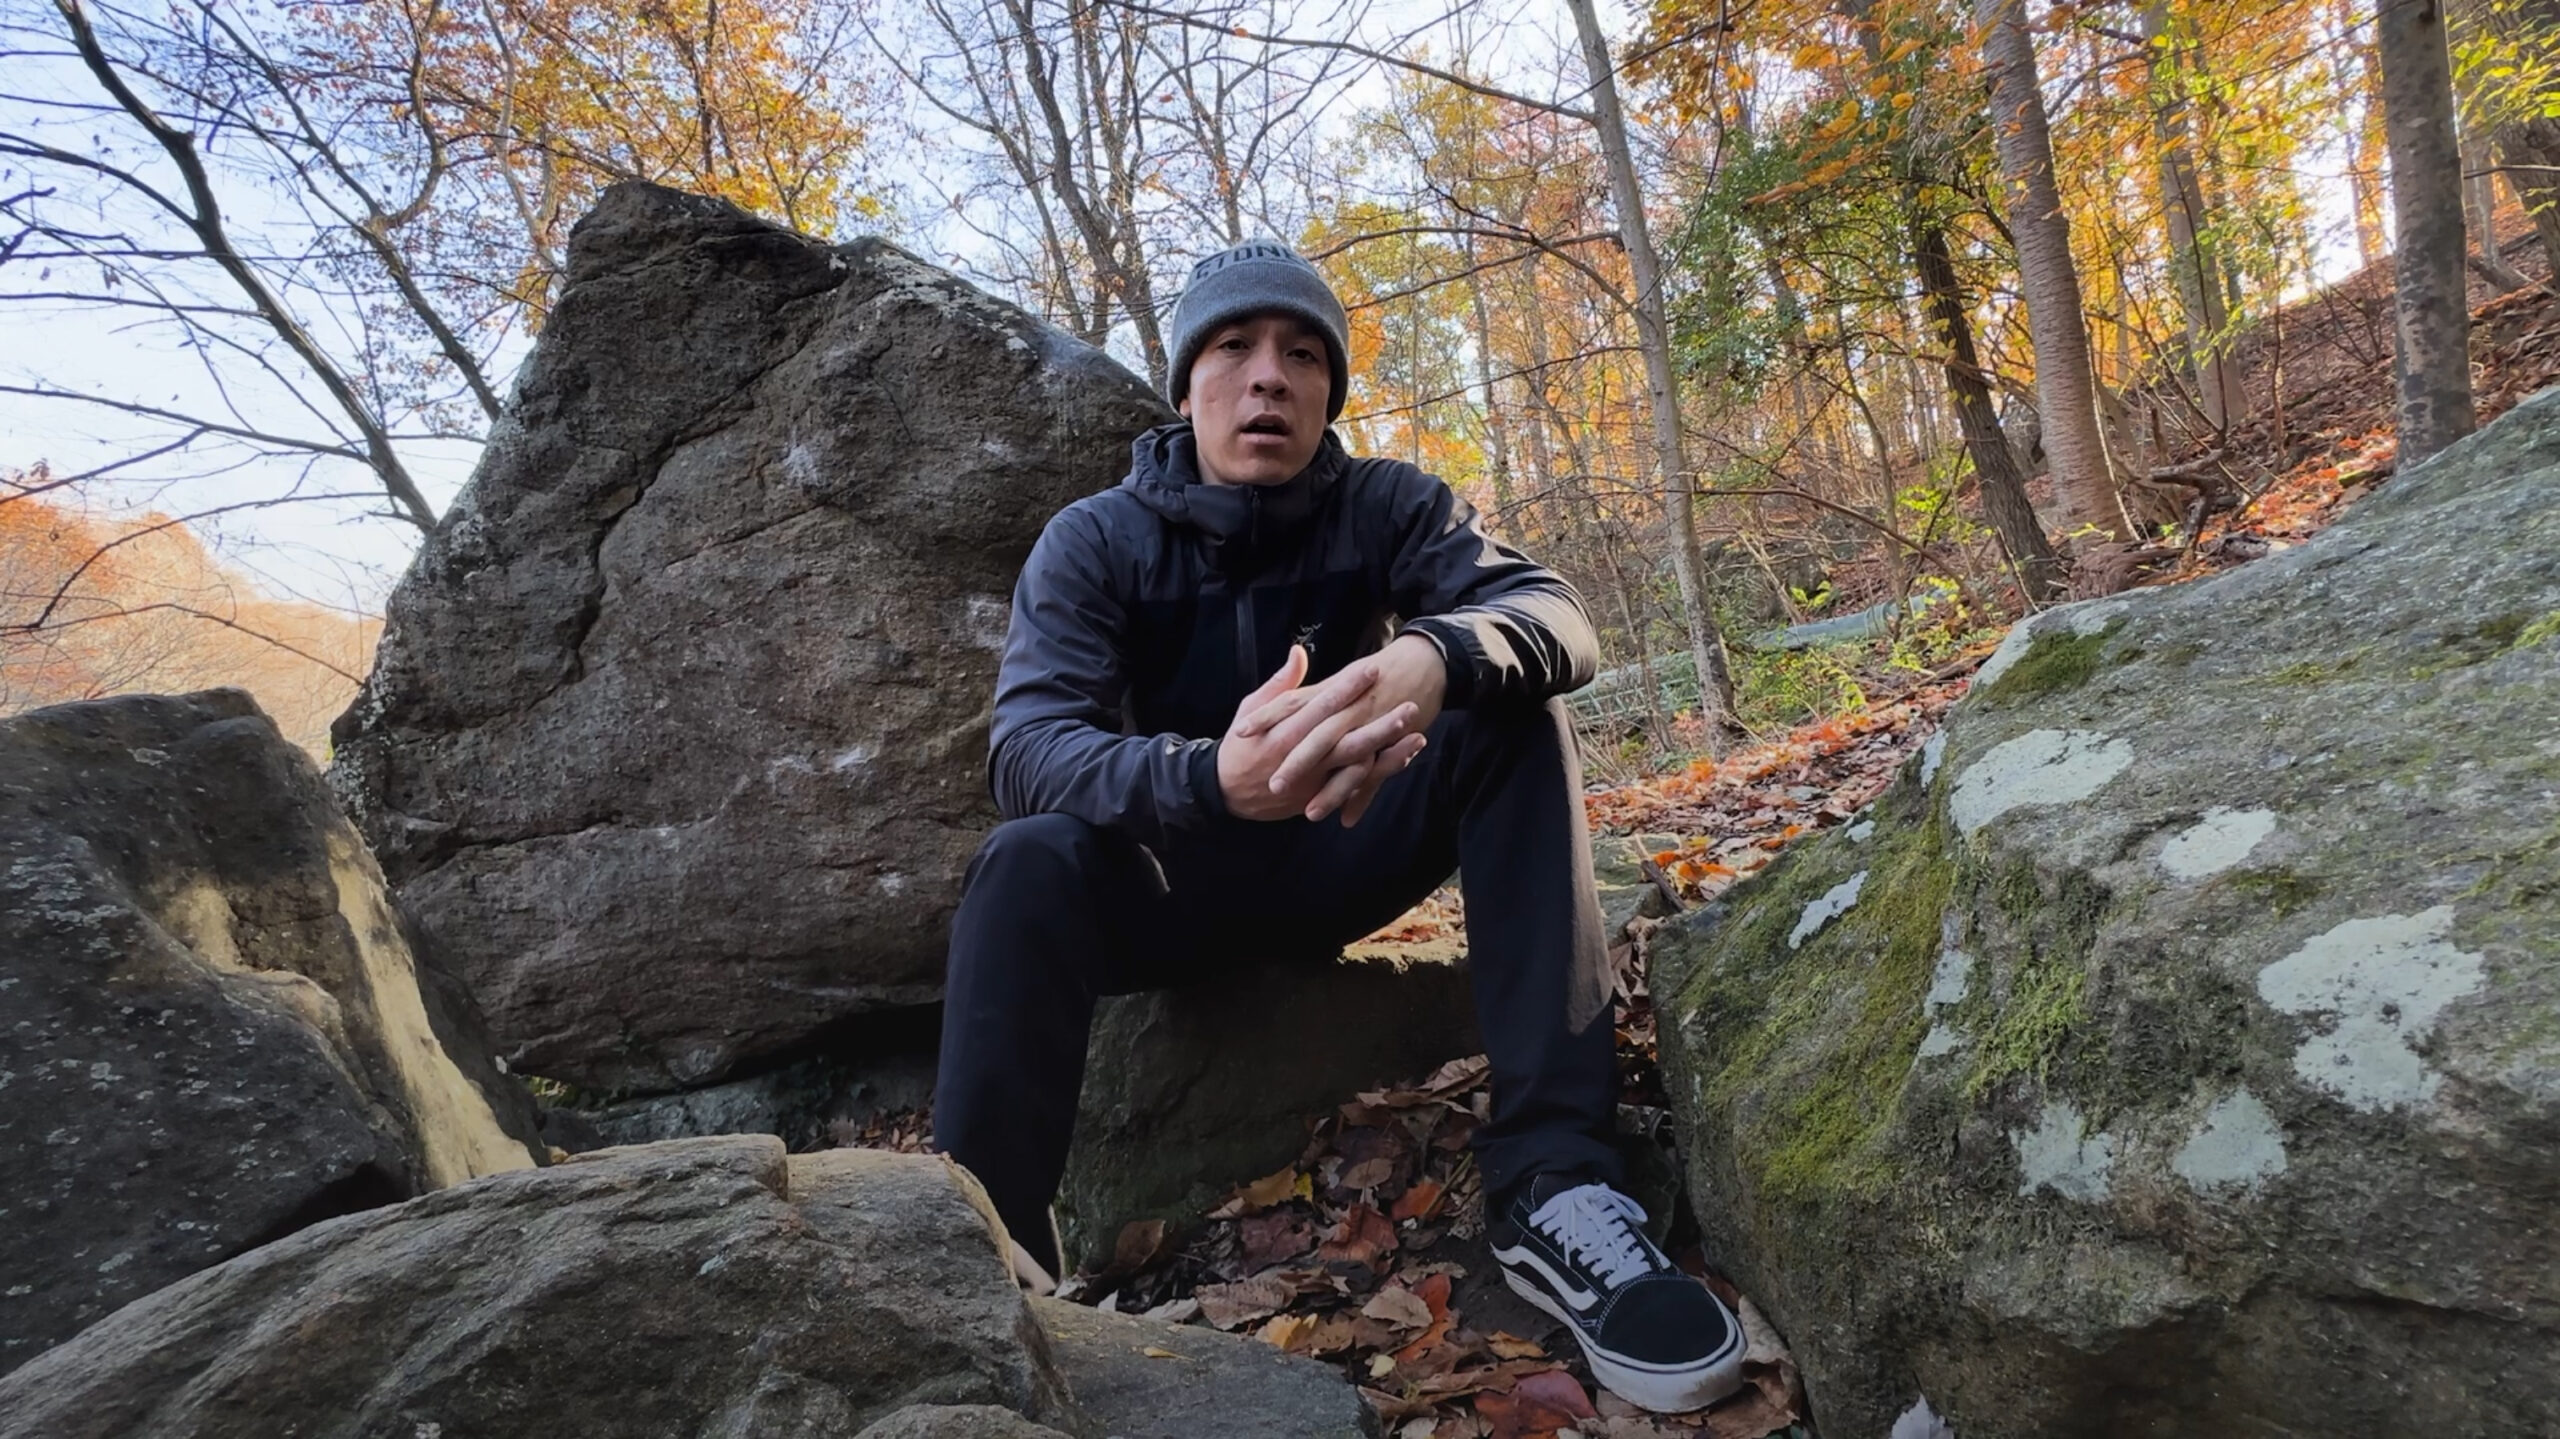 Jared Lenahan sitting on a rock looking at the camera wearing a hat and a jacket